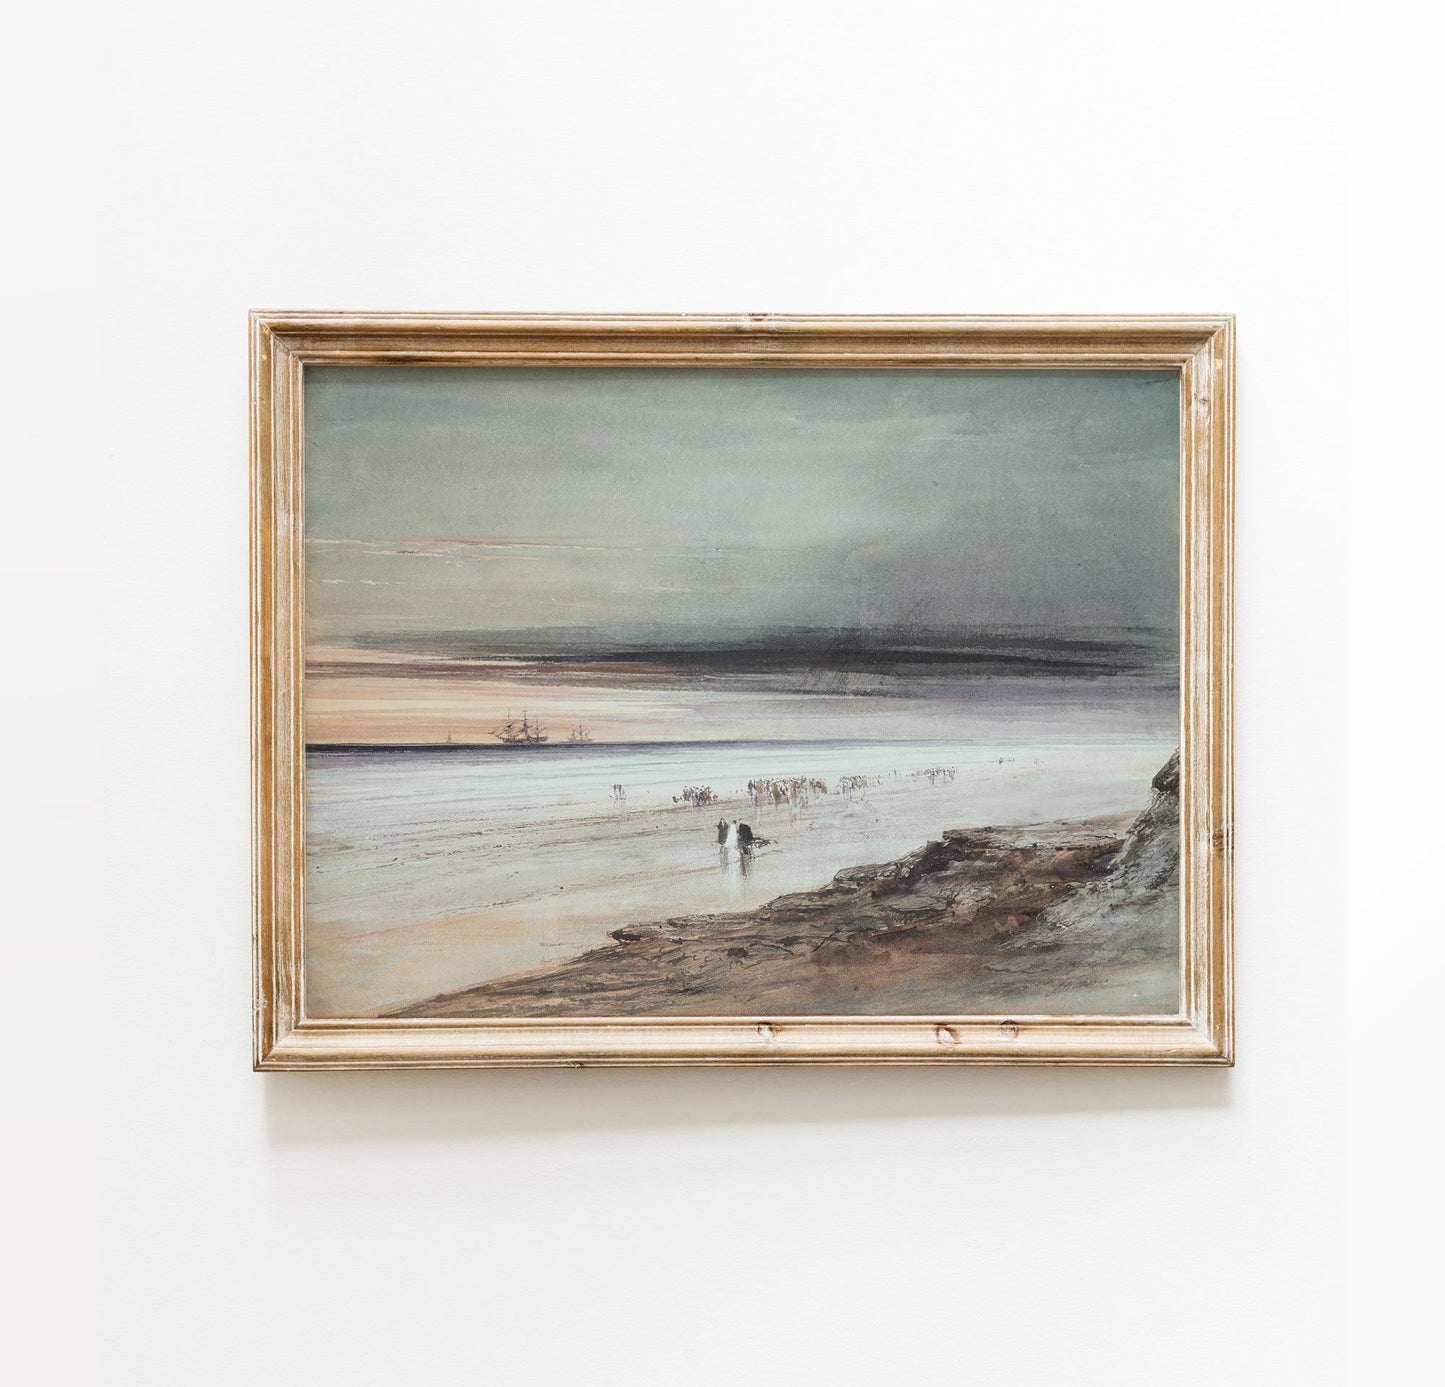 A Dark Beach Scene Vintage Coastal Wall Art Farmhouse Oil Painting Replica - Printed and shipped to you on premium paper